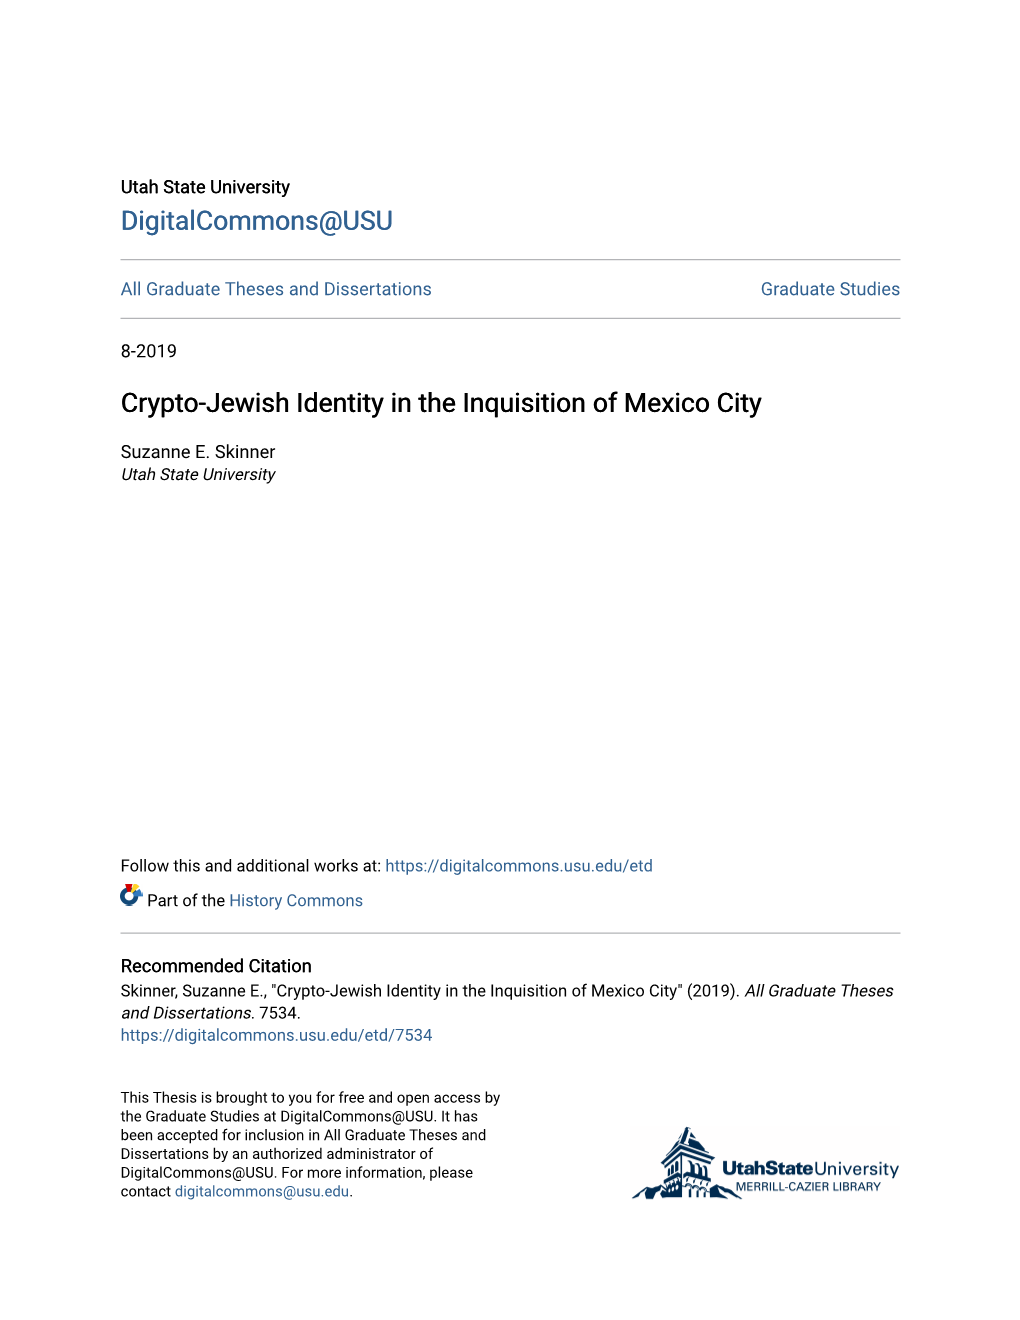 Crypto-Jewish Identity in the Inquisition of Mexico City